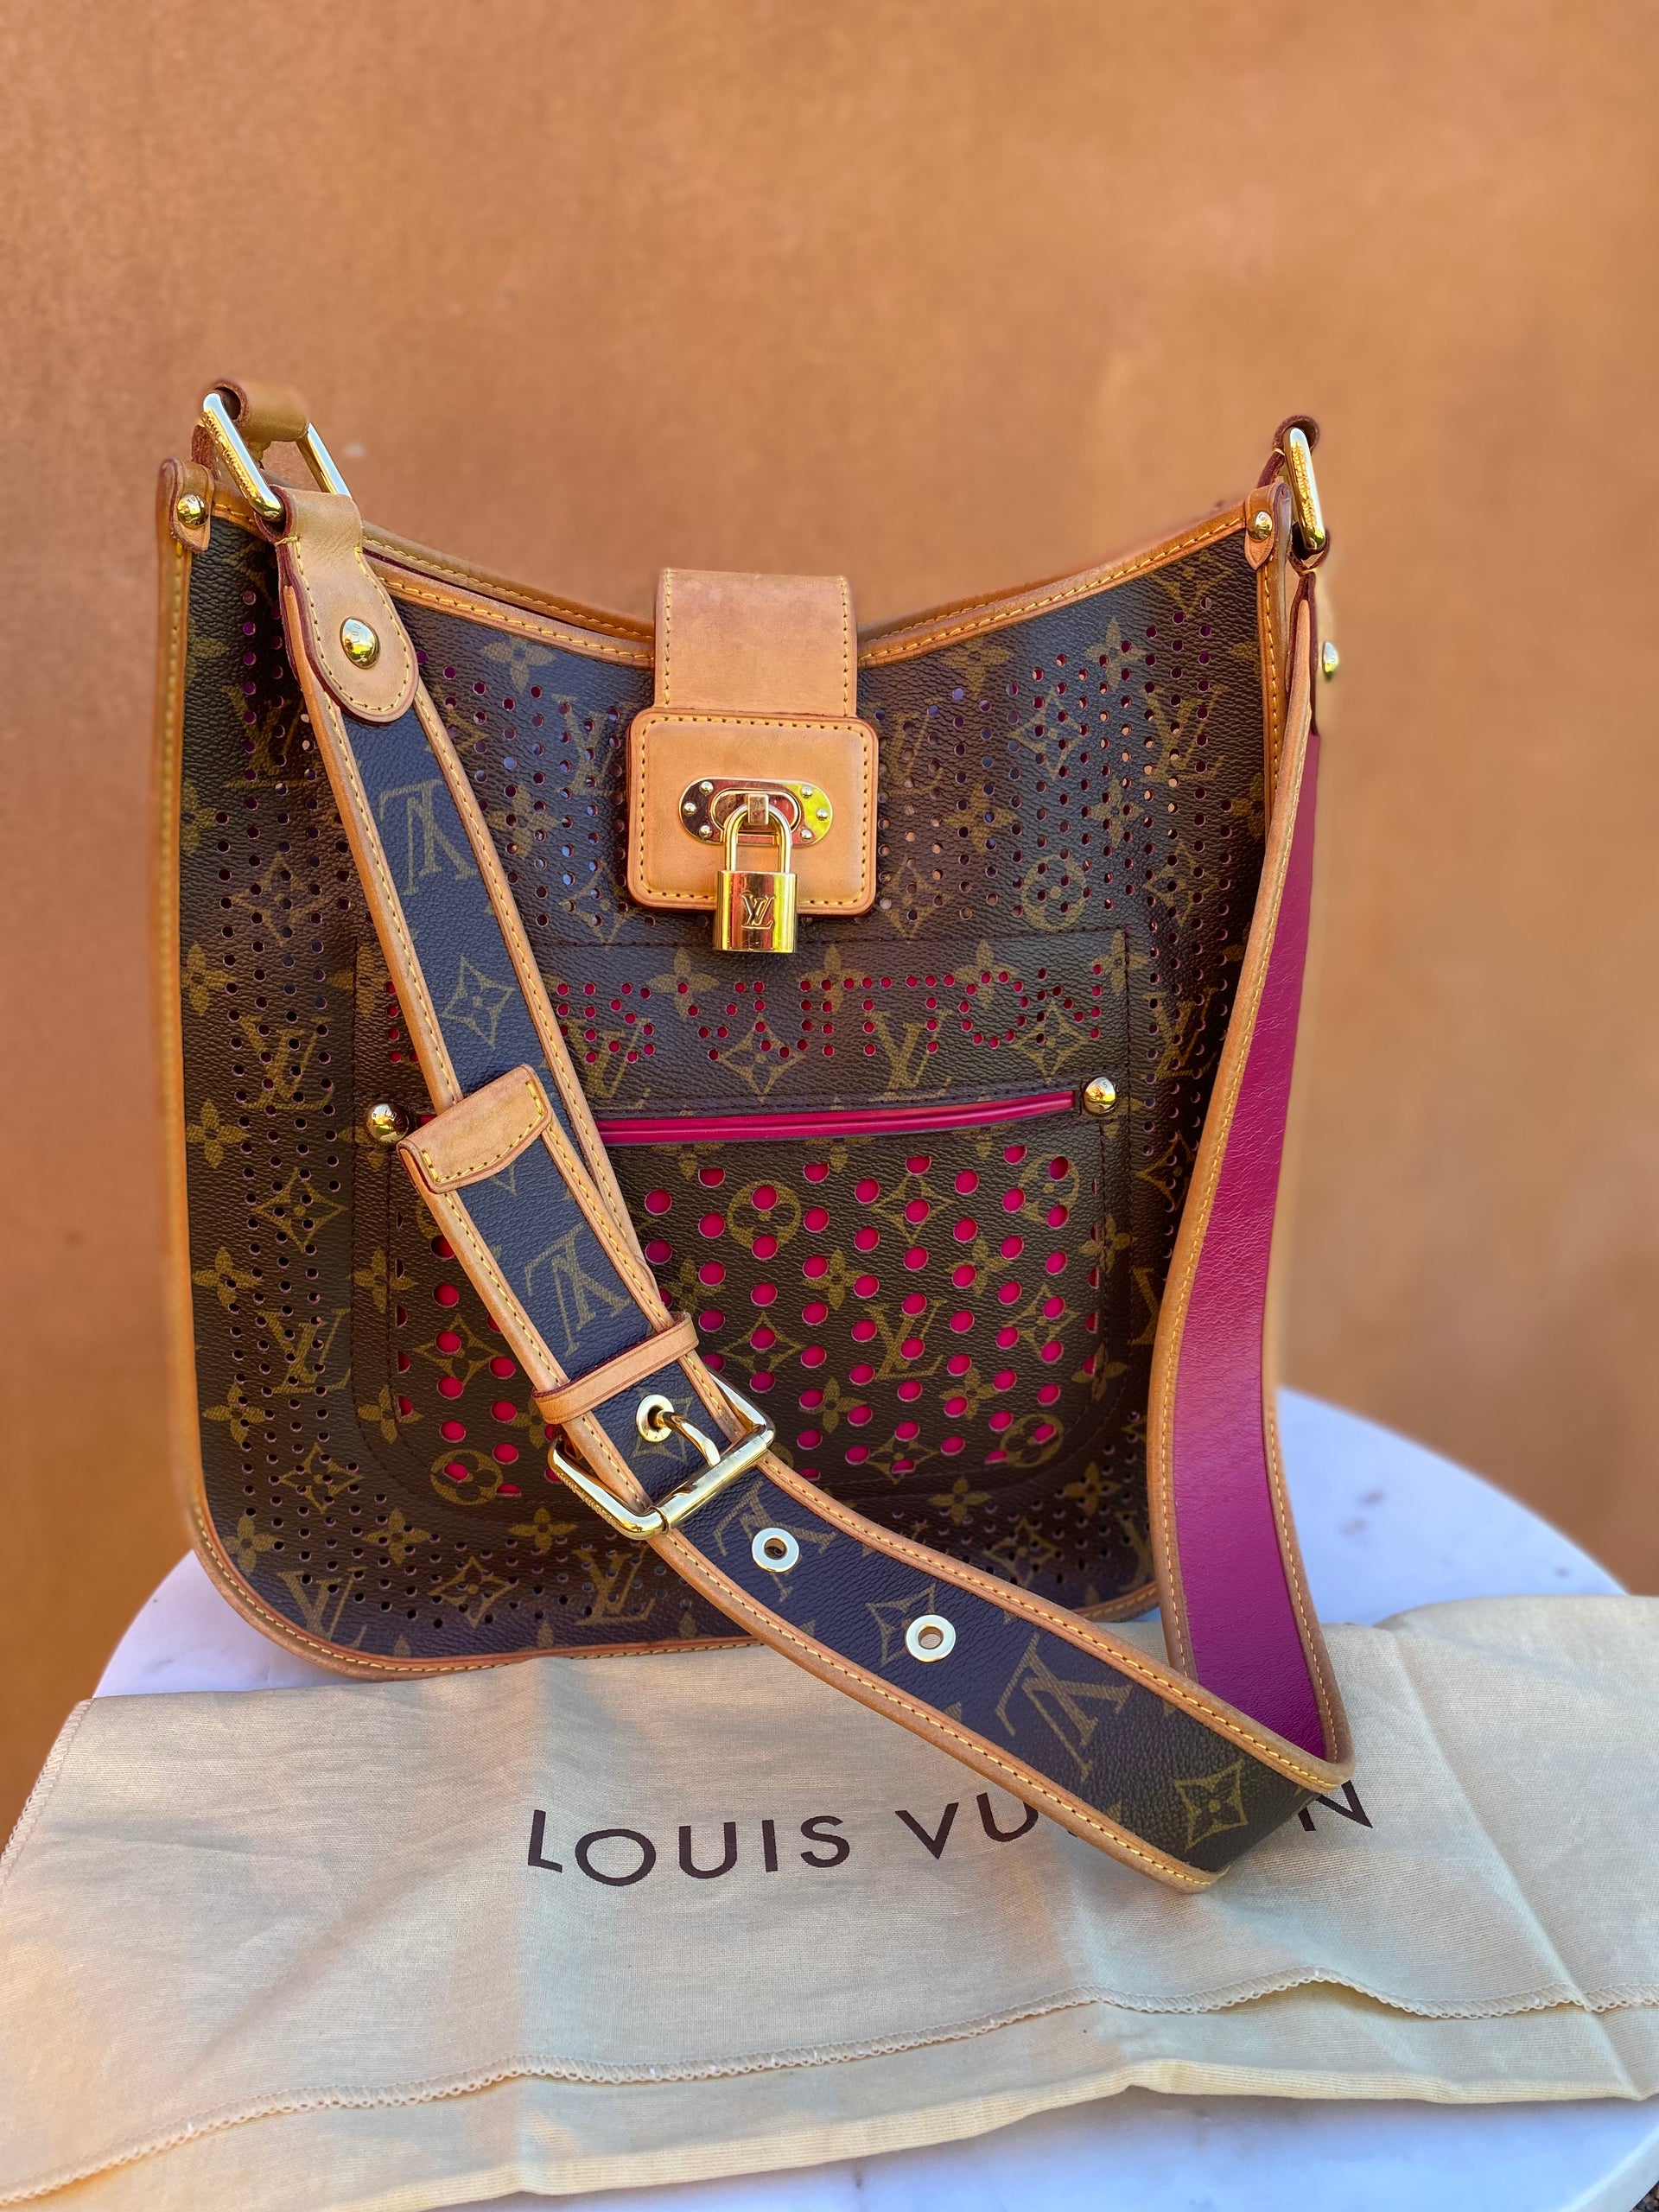 Louis Vuitton Limited Edition Monogram Perforated Musette Bag